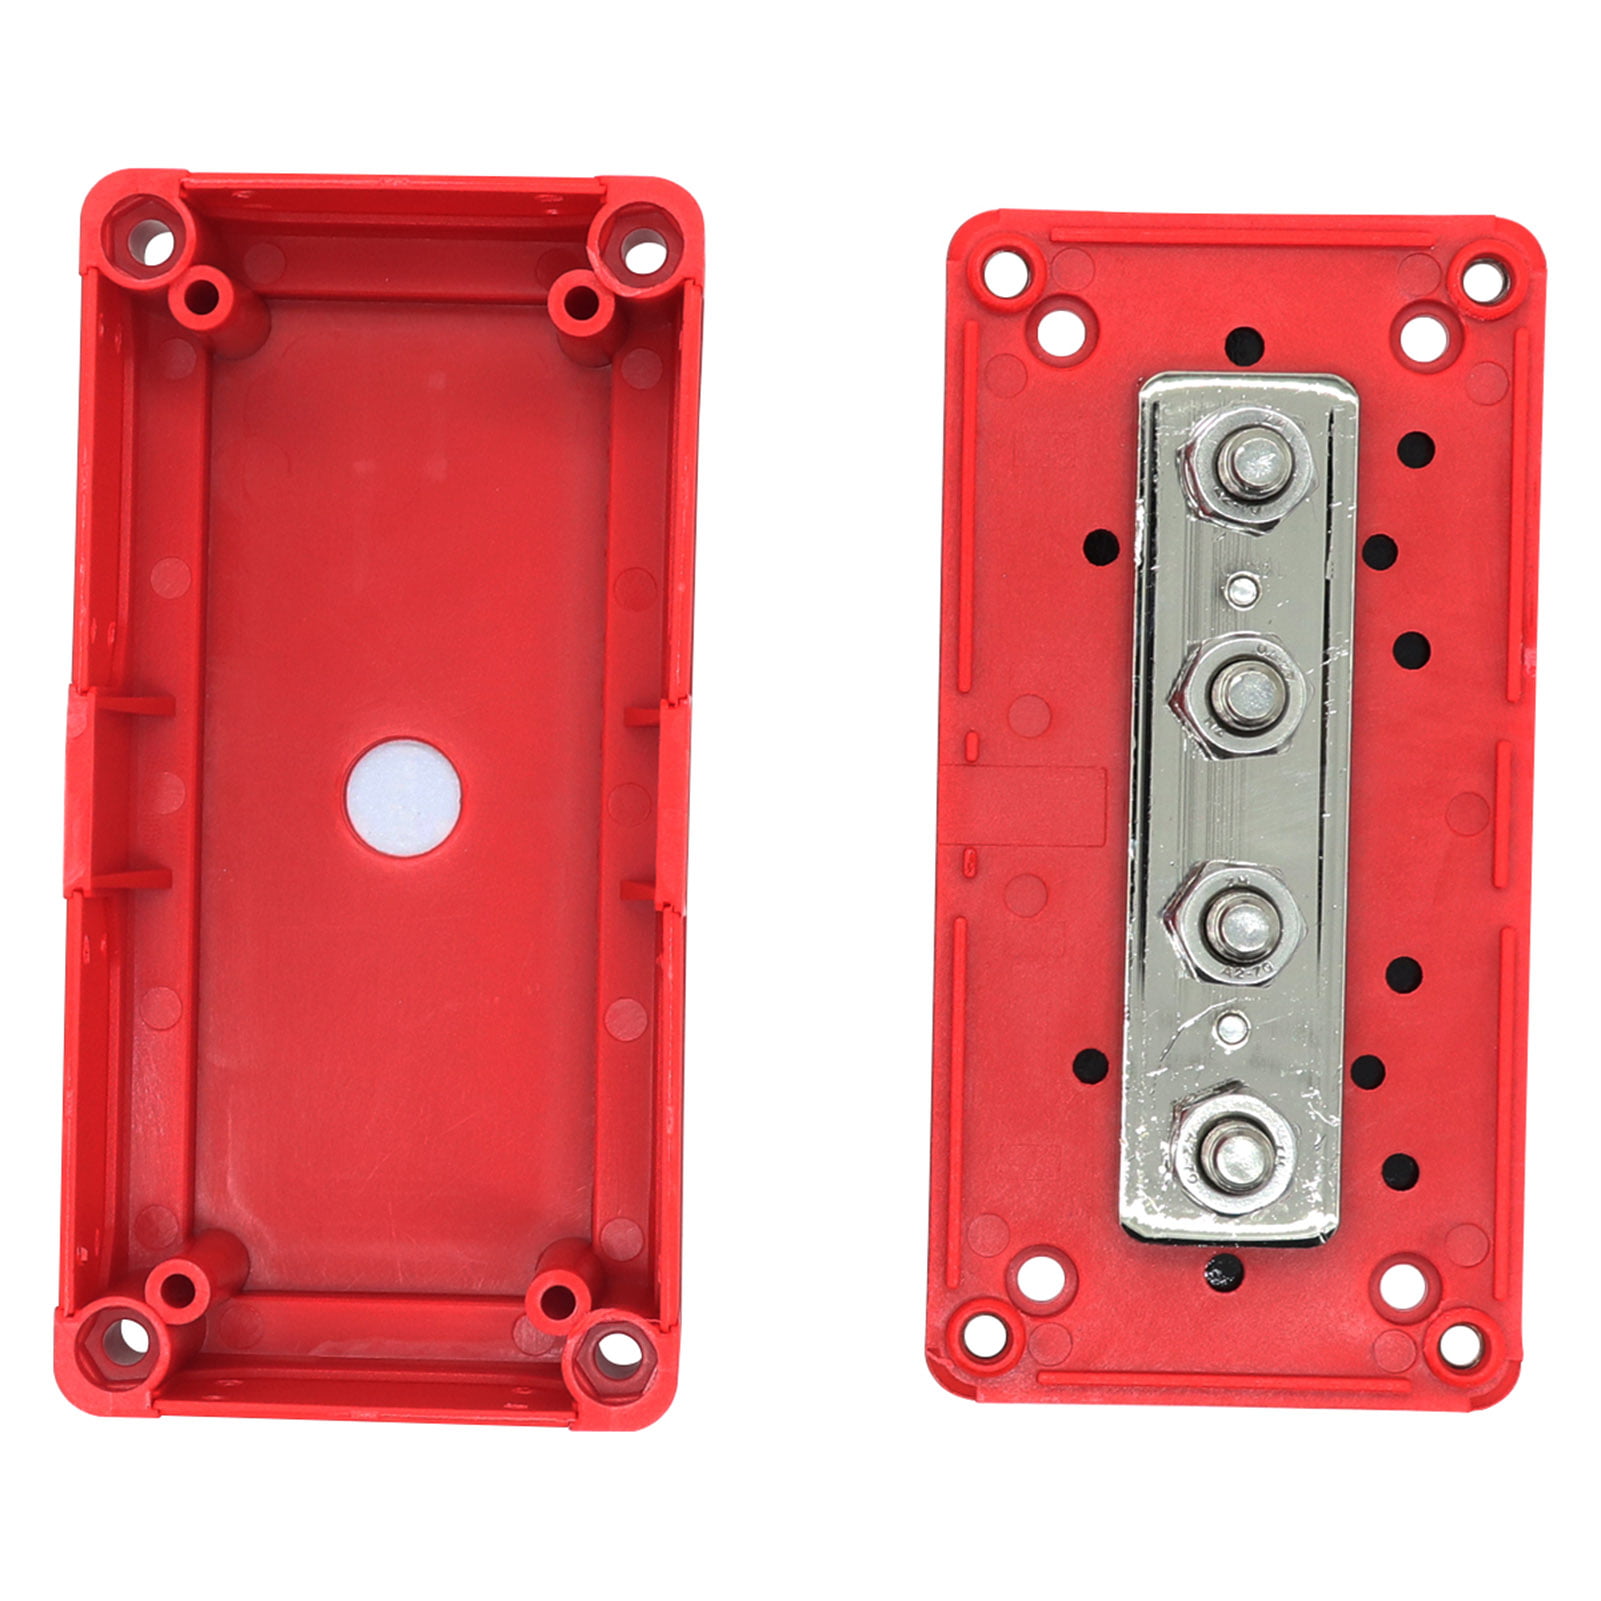 Antrader 3/8 DC 48V Bus Bar Terminal Block Insulated Dual M8 Heavy Duty Positive Power Distribution Junction Stud Post for Truck RV Boat Car Electronics 